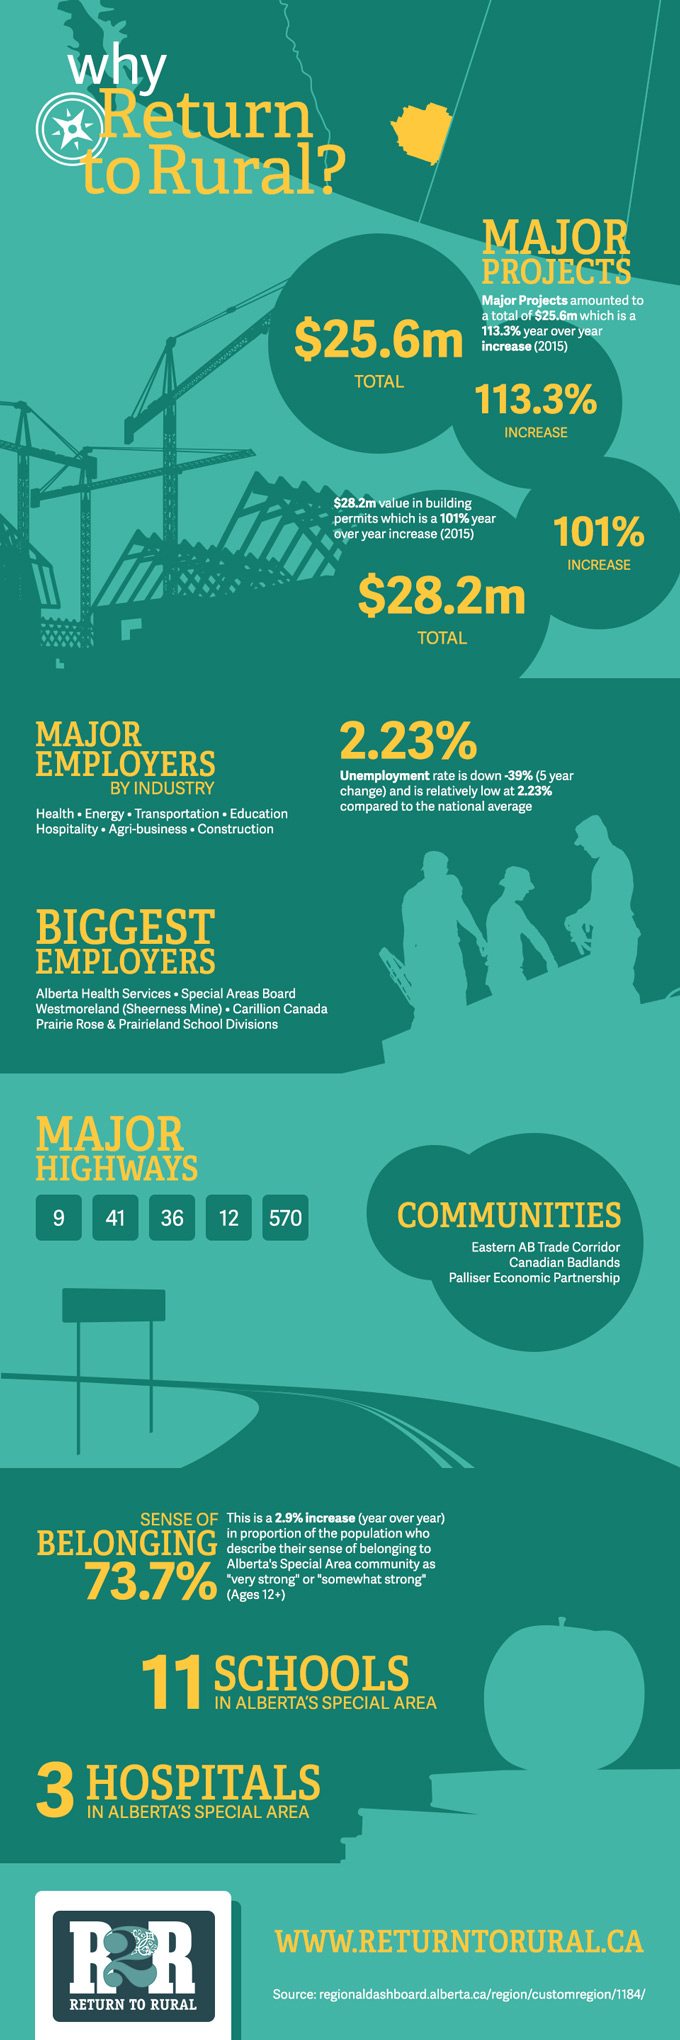 Return to Rural Infographic